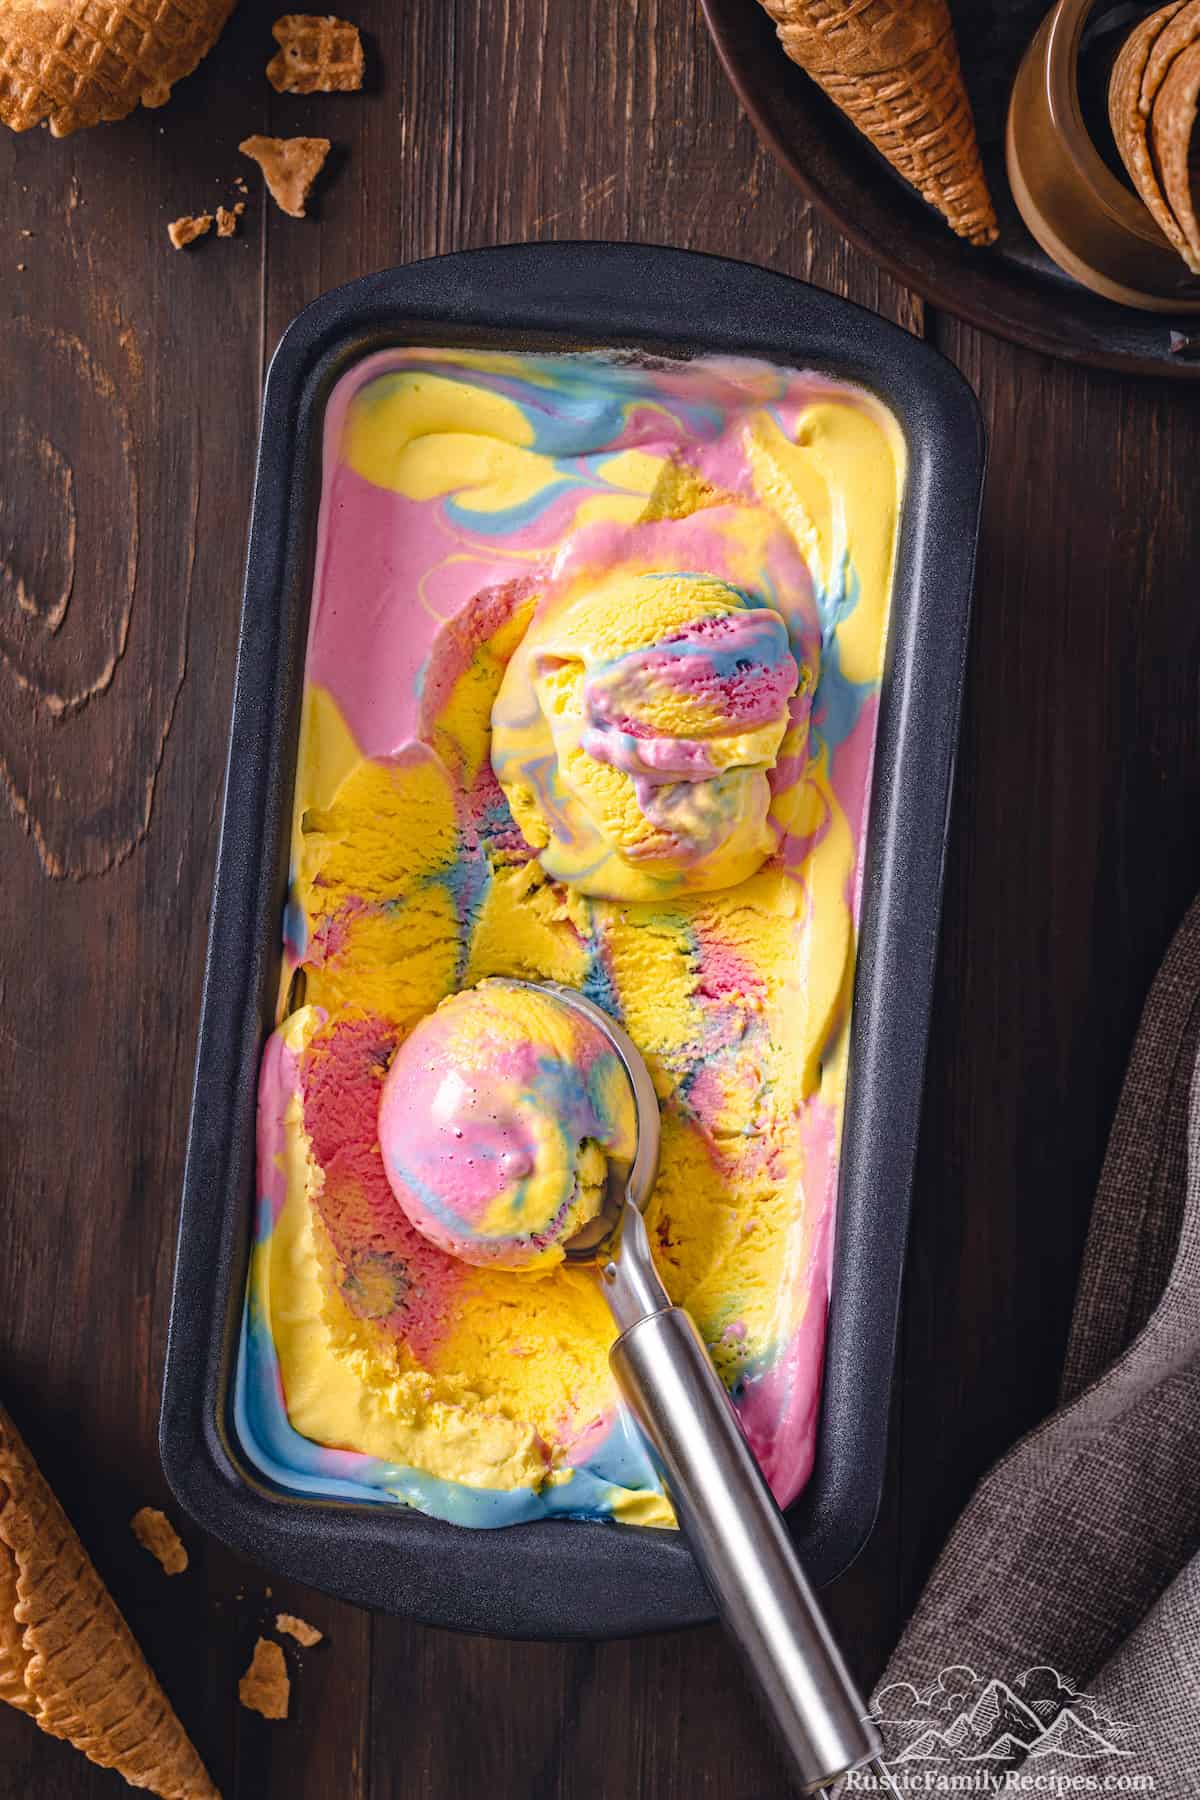 Top view of homemade Superman ice cream being scooped from a loaf pan.